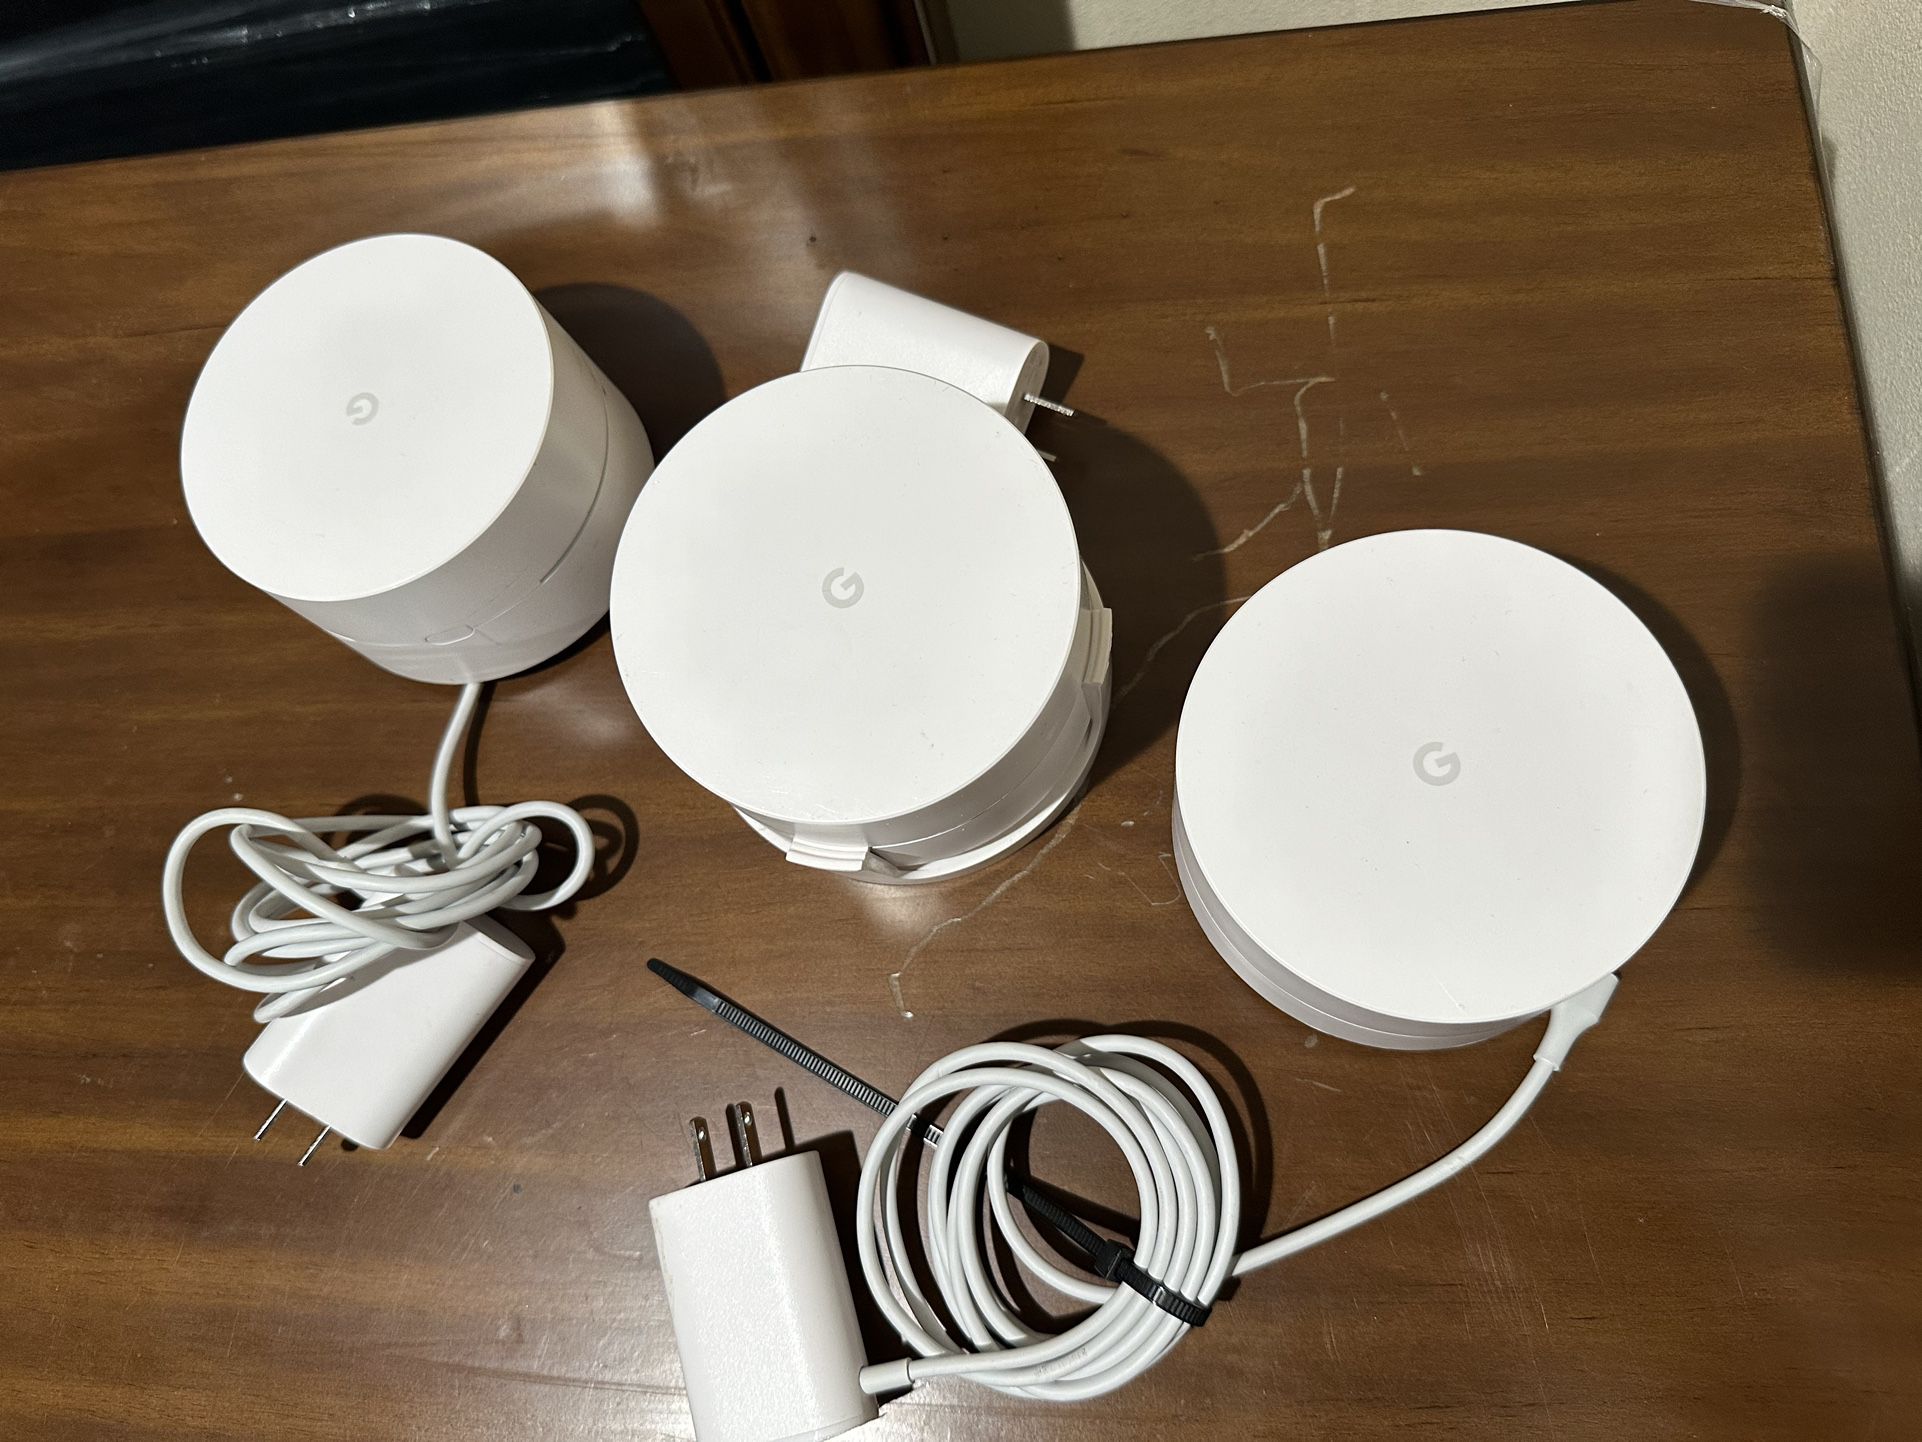 Google WiFi AC-1304 Mesh Wi-Fi Router Extender Mesh Point Tested Working